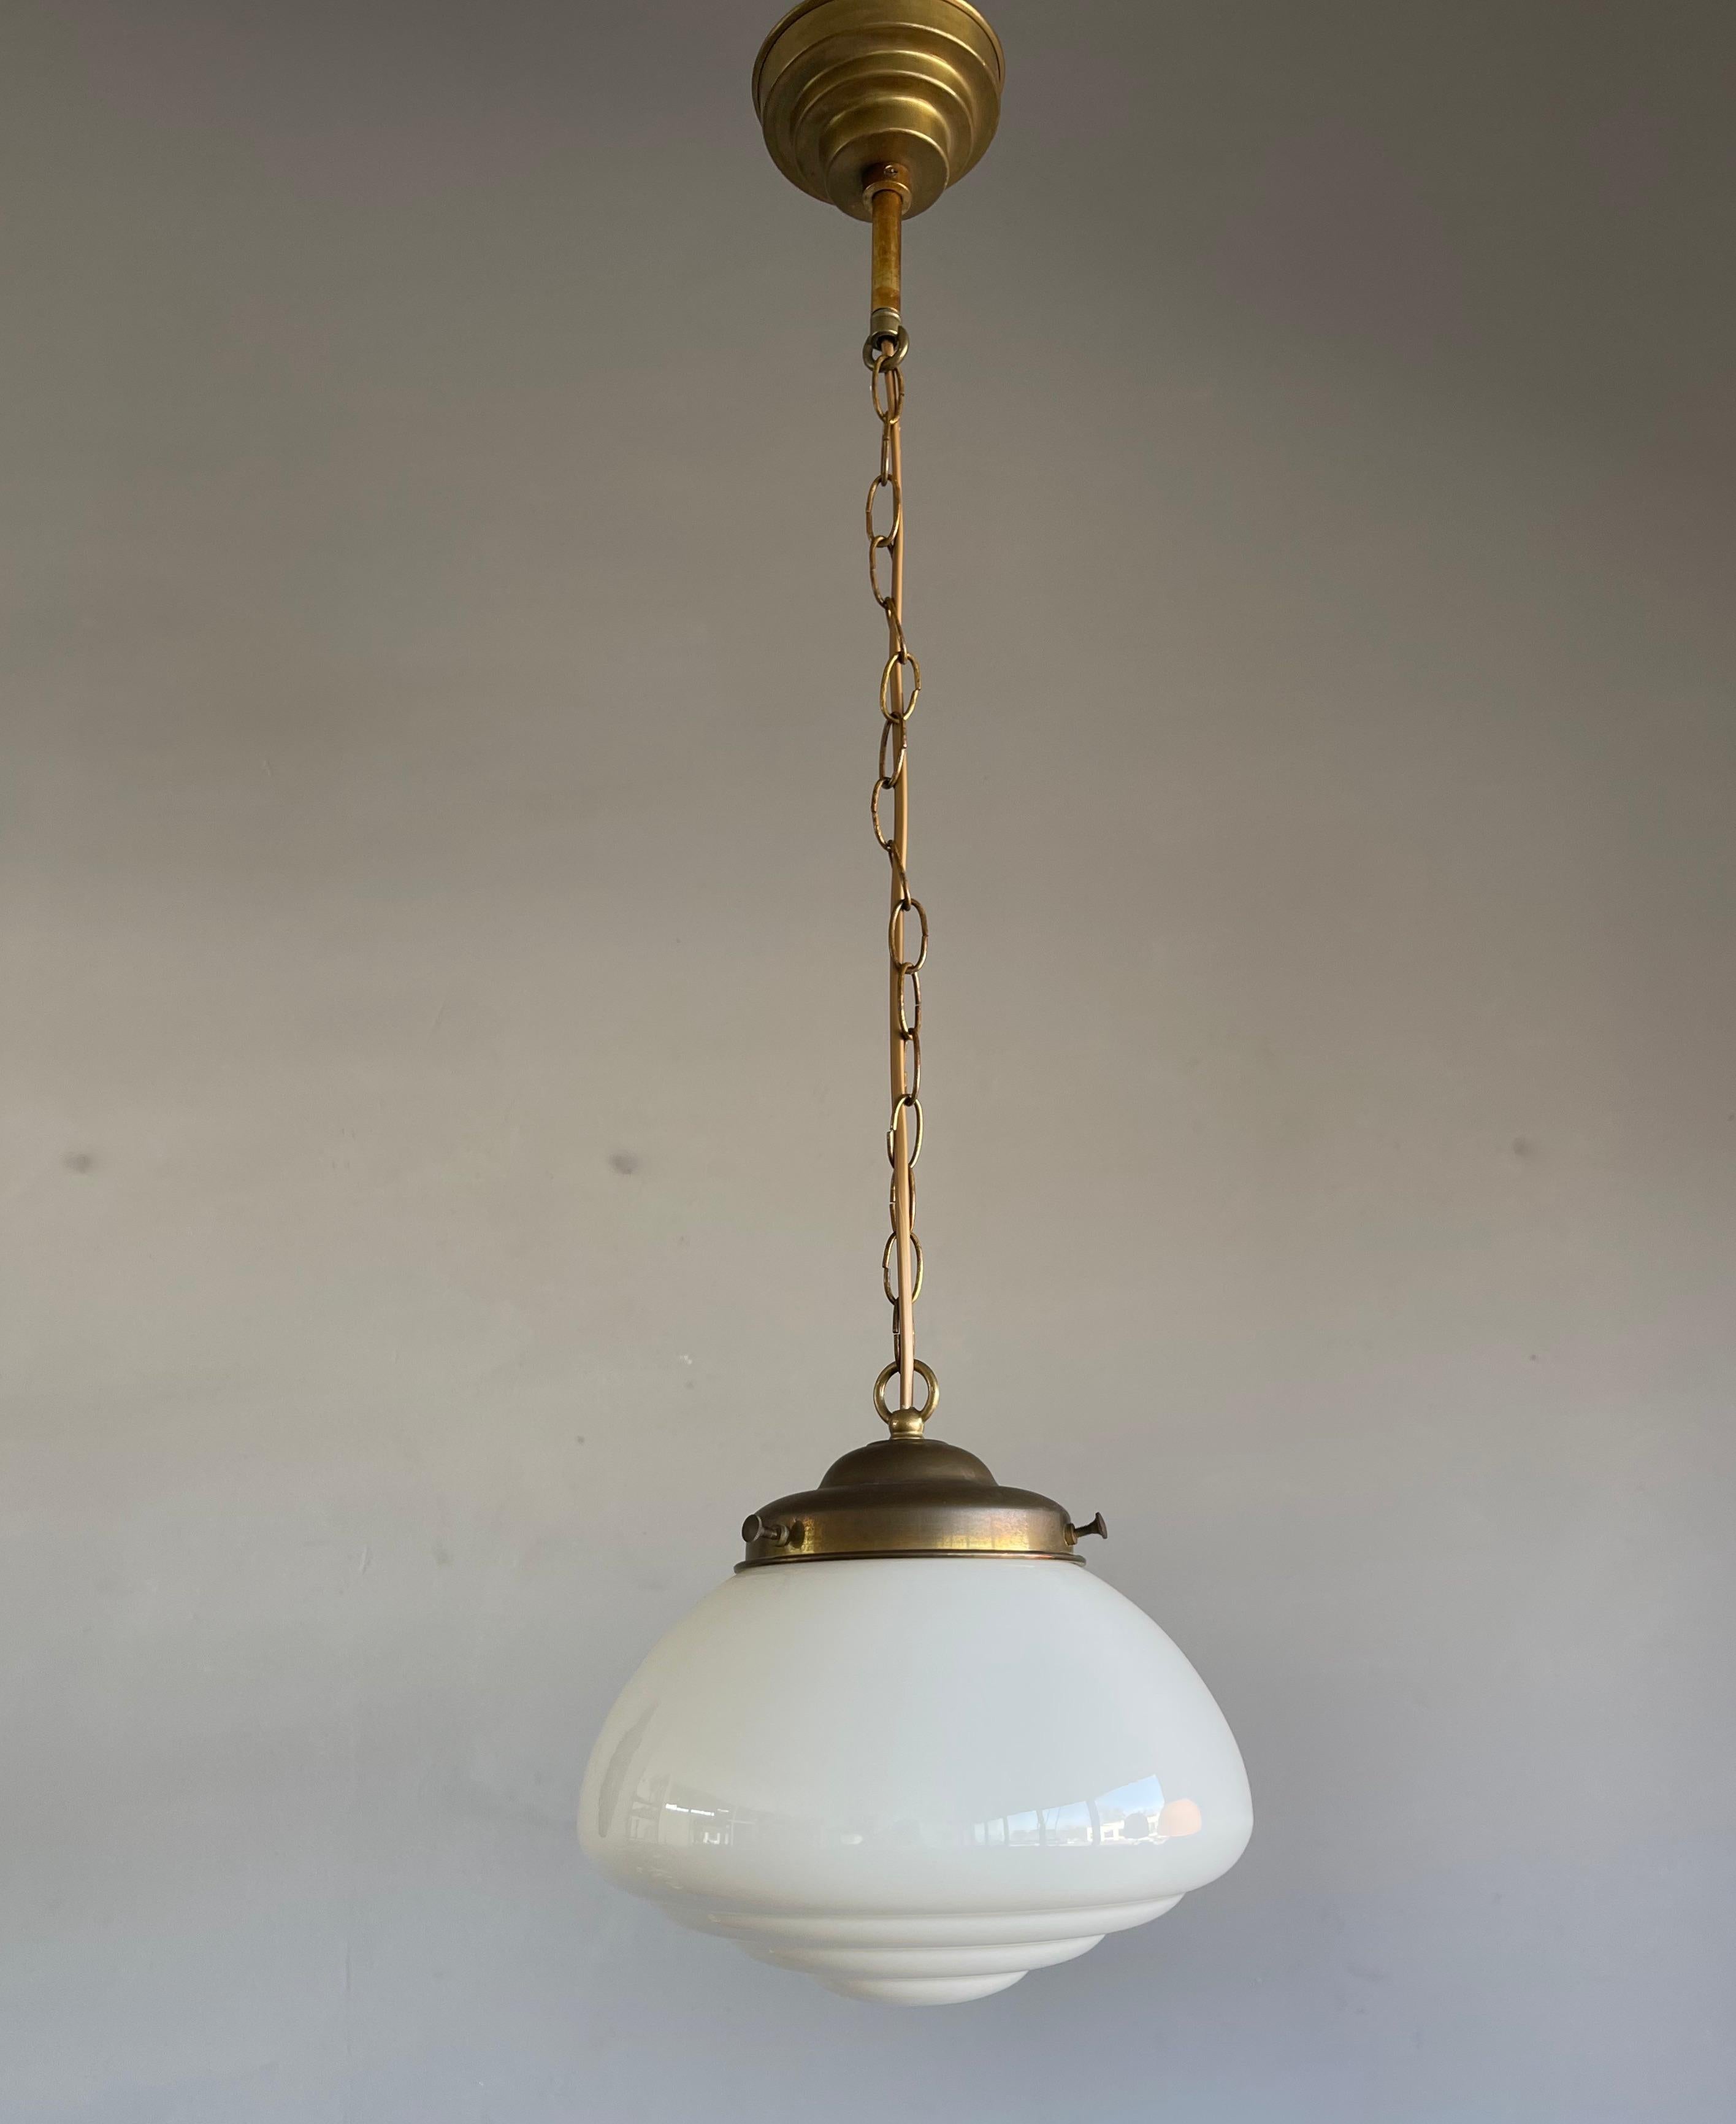 Hand-Crafted Pair of Timeless Art Deco and Bauhaus Style Brass and Opaline Pendant Lights